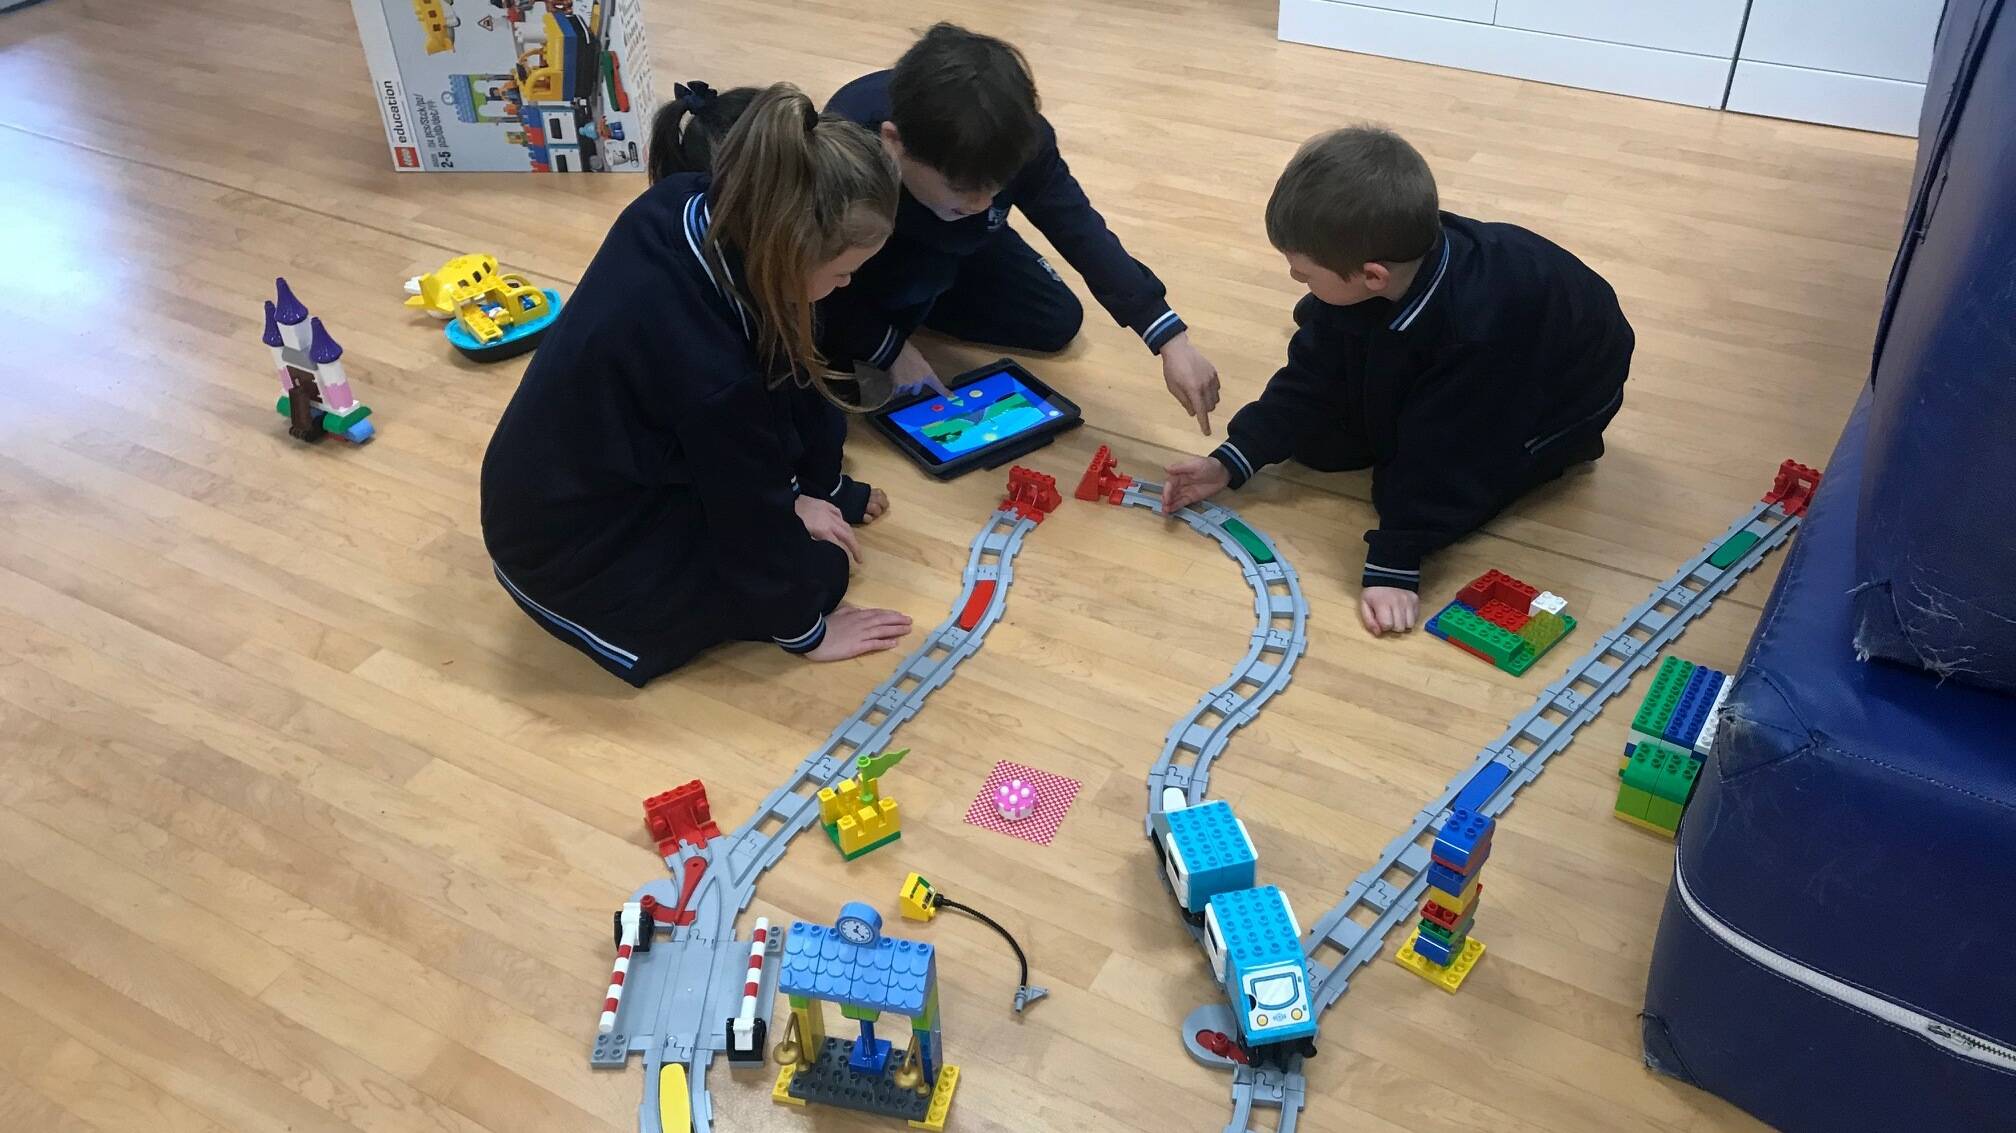 “Our visit to St Joseph’s School to see the junior primary students using the Bee Bots and Lego STEM sets purchased with their 2020 Bright Future Grants was amazing to say the least,” said Birkenhead terminal manager David Barker.